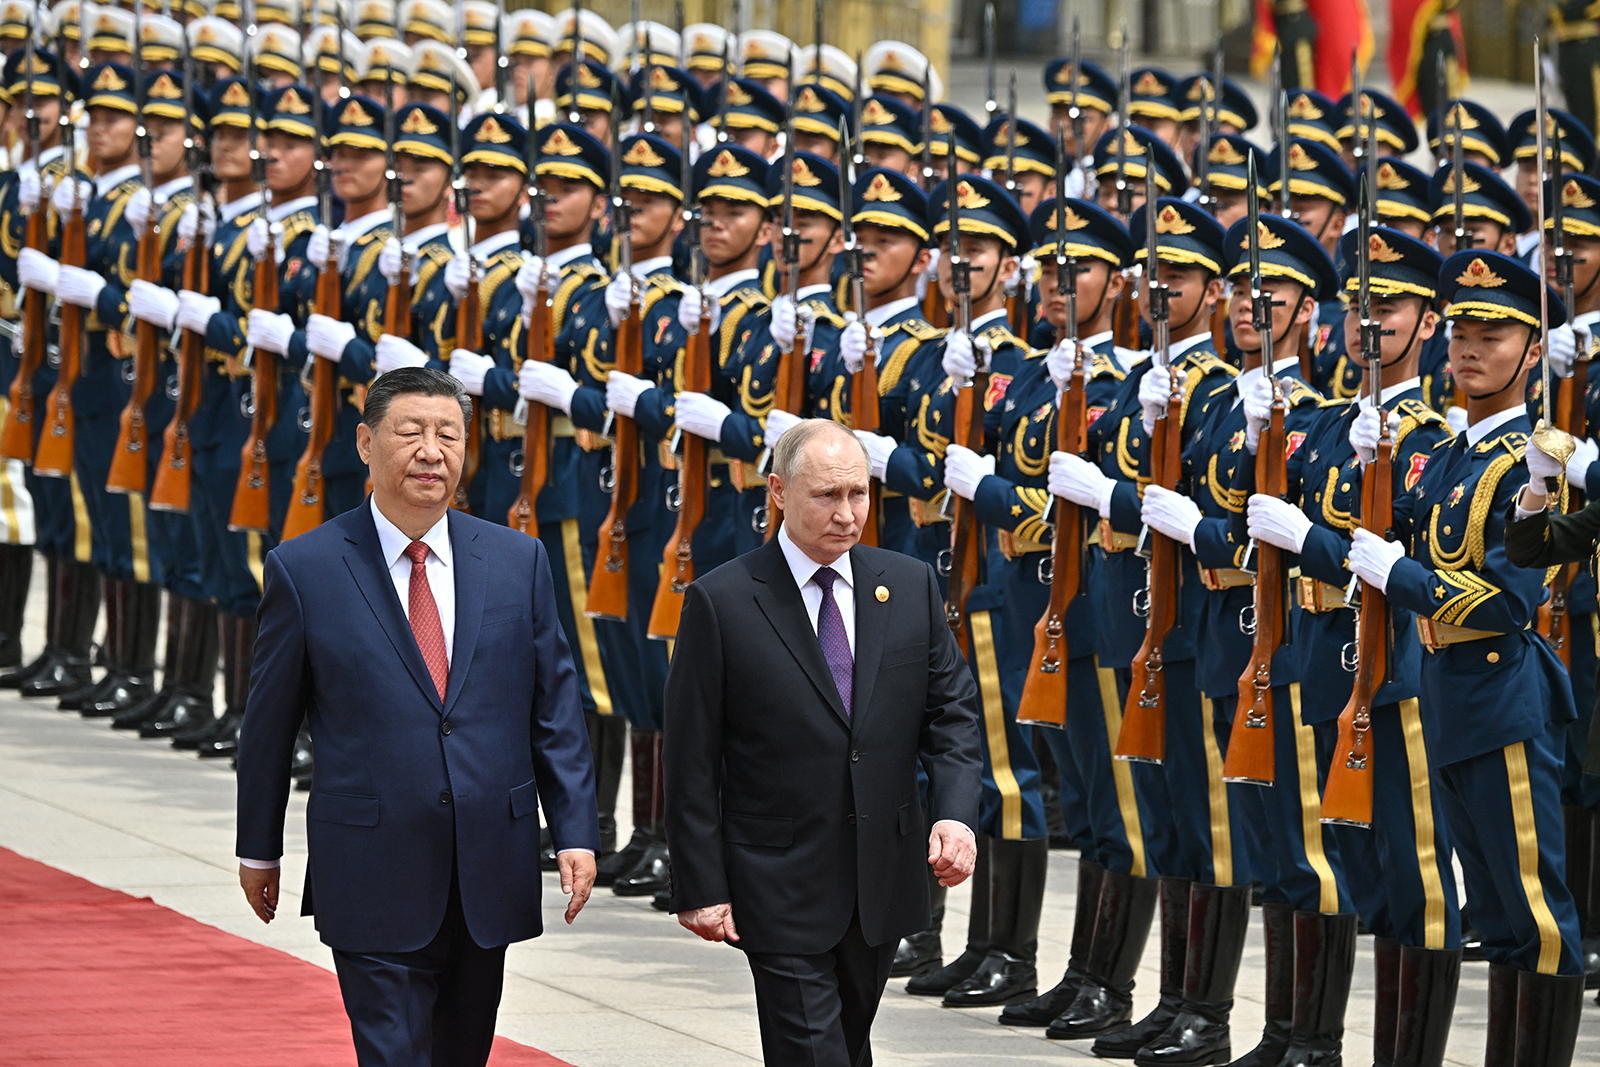 Russia's President Vladimir Putin and China's President Xi Jinping attend an official welcoming ceremony in front of the Great Hall of the People in Tiananmen Square in Beijing on May 16.